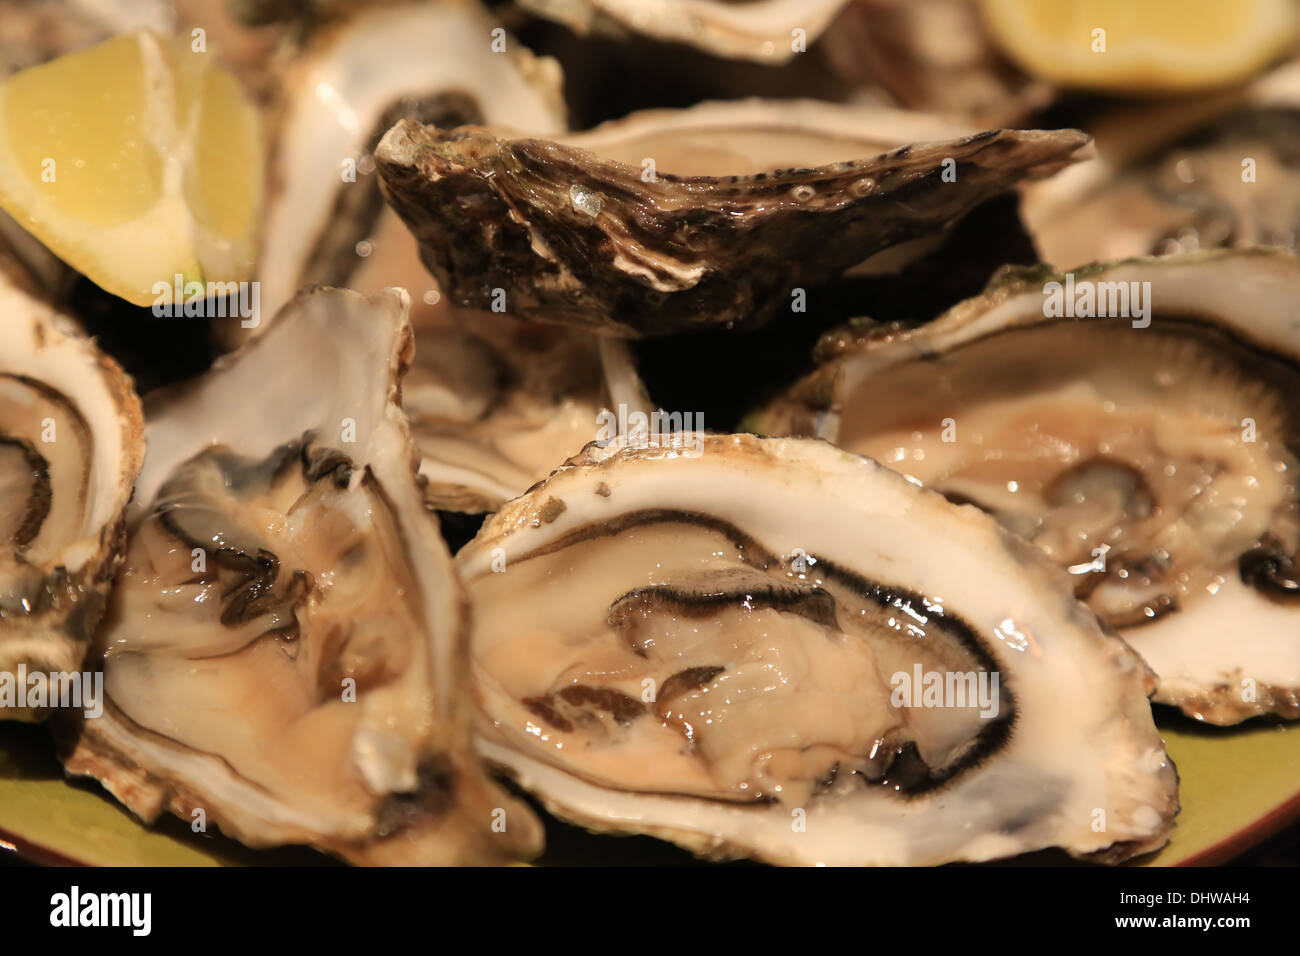 Oysters. Stock Photo